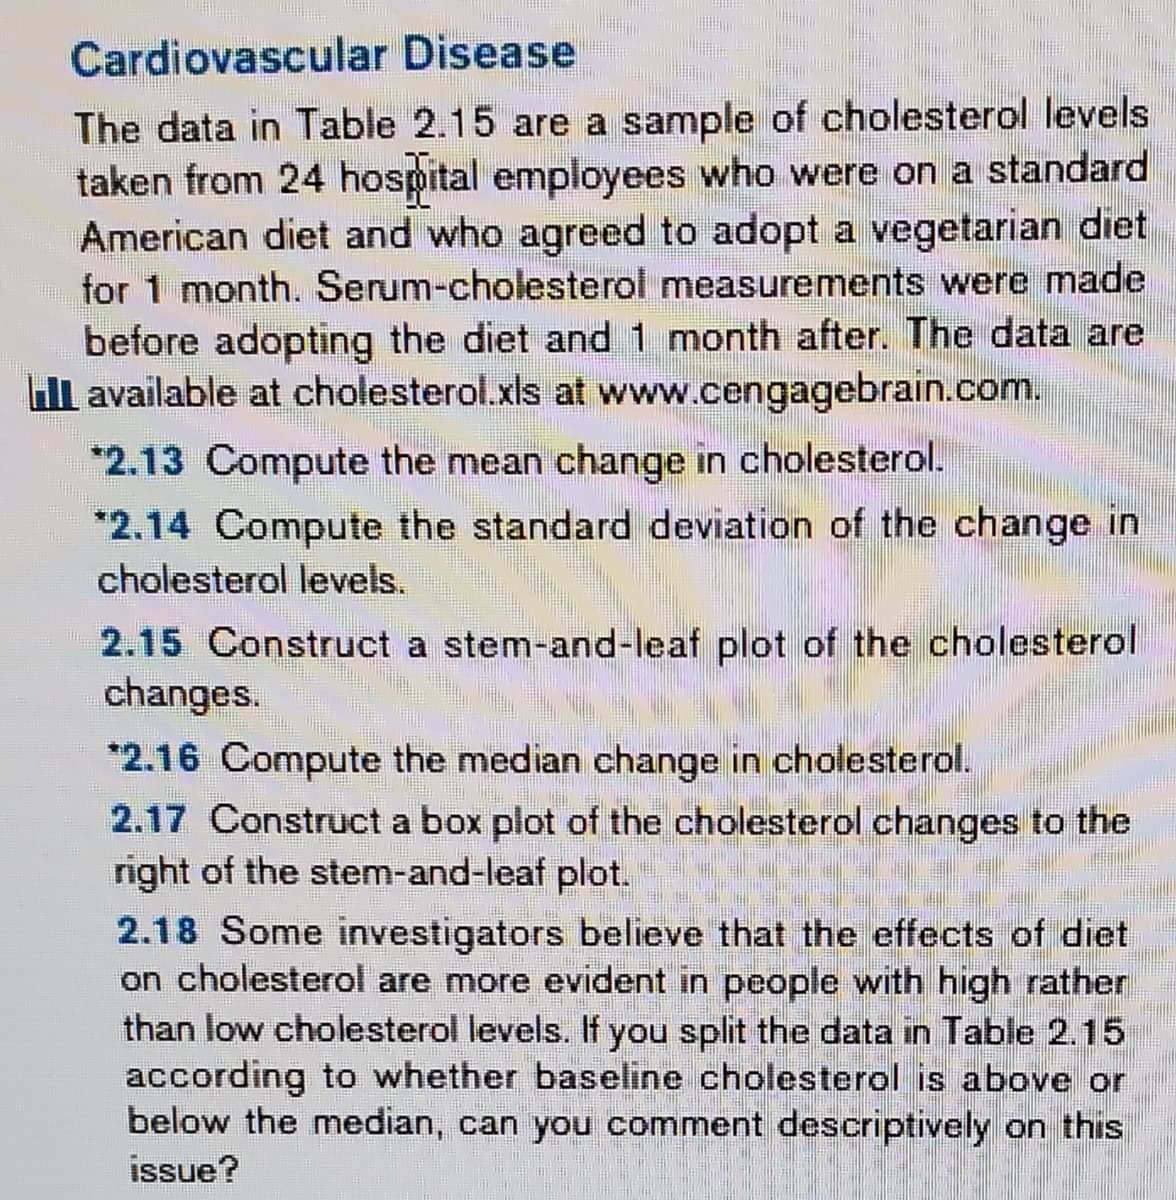 Cardiovascular Disease
The data in Table 2.15 are a sample of cholesterol levels.
taken from 24 hospital employees who were on a standard
American diet and who agreed to adopt a vegetarian diet
for 1 month. Serum-cholesterol measurements were made
before adopting the diet and 1 month after. The data are
Il available at cholesterol.xls at www.cengagebrain.com.
*2.13 Compute the mean change in cholesterol.
*2.14 Compute the standard deviation of the change in
cholesterol levels.
2.15 Construct a stem-and-leaf plot of the cholesterol
changes.
*2.16 Compute the median change in cholesterol.
2.17 Construct a box plot of the cholesterol changes to the
right of the stem-and-leaf plot.
2.18 Some investigators believe that the effects of diet
on cholesterol are more evident in people with high rather
than low cholesterol levels. If you split the data in Table 2.15
according to whether baseline cholesterol is above or
below the median, can you comment descriptively on this
issue?